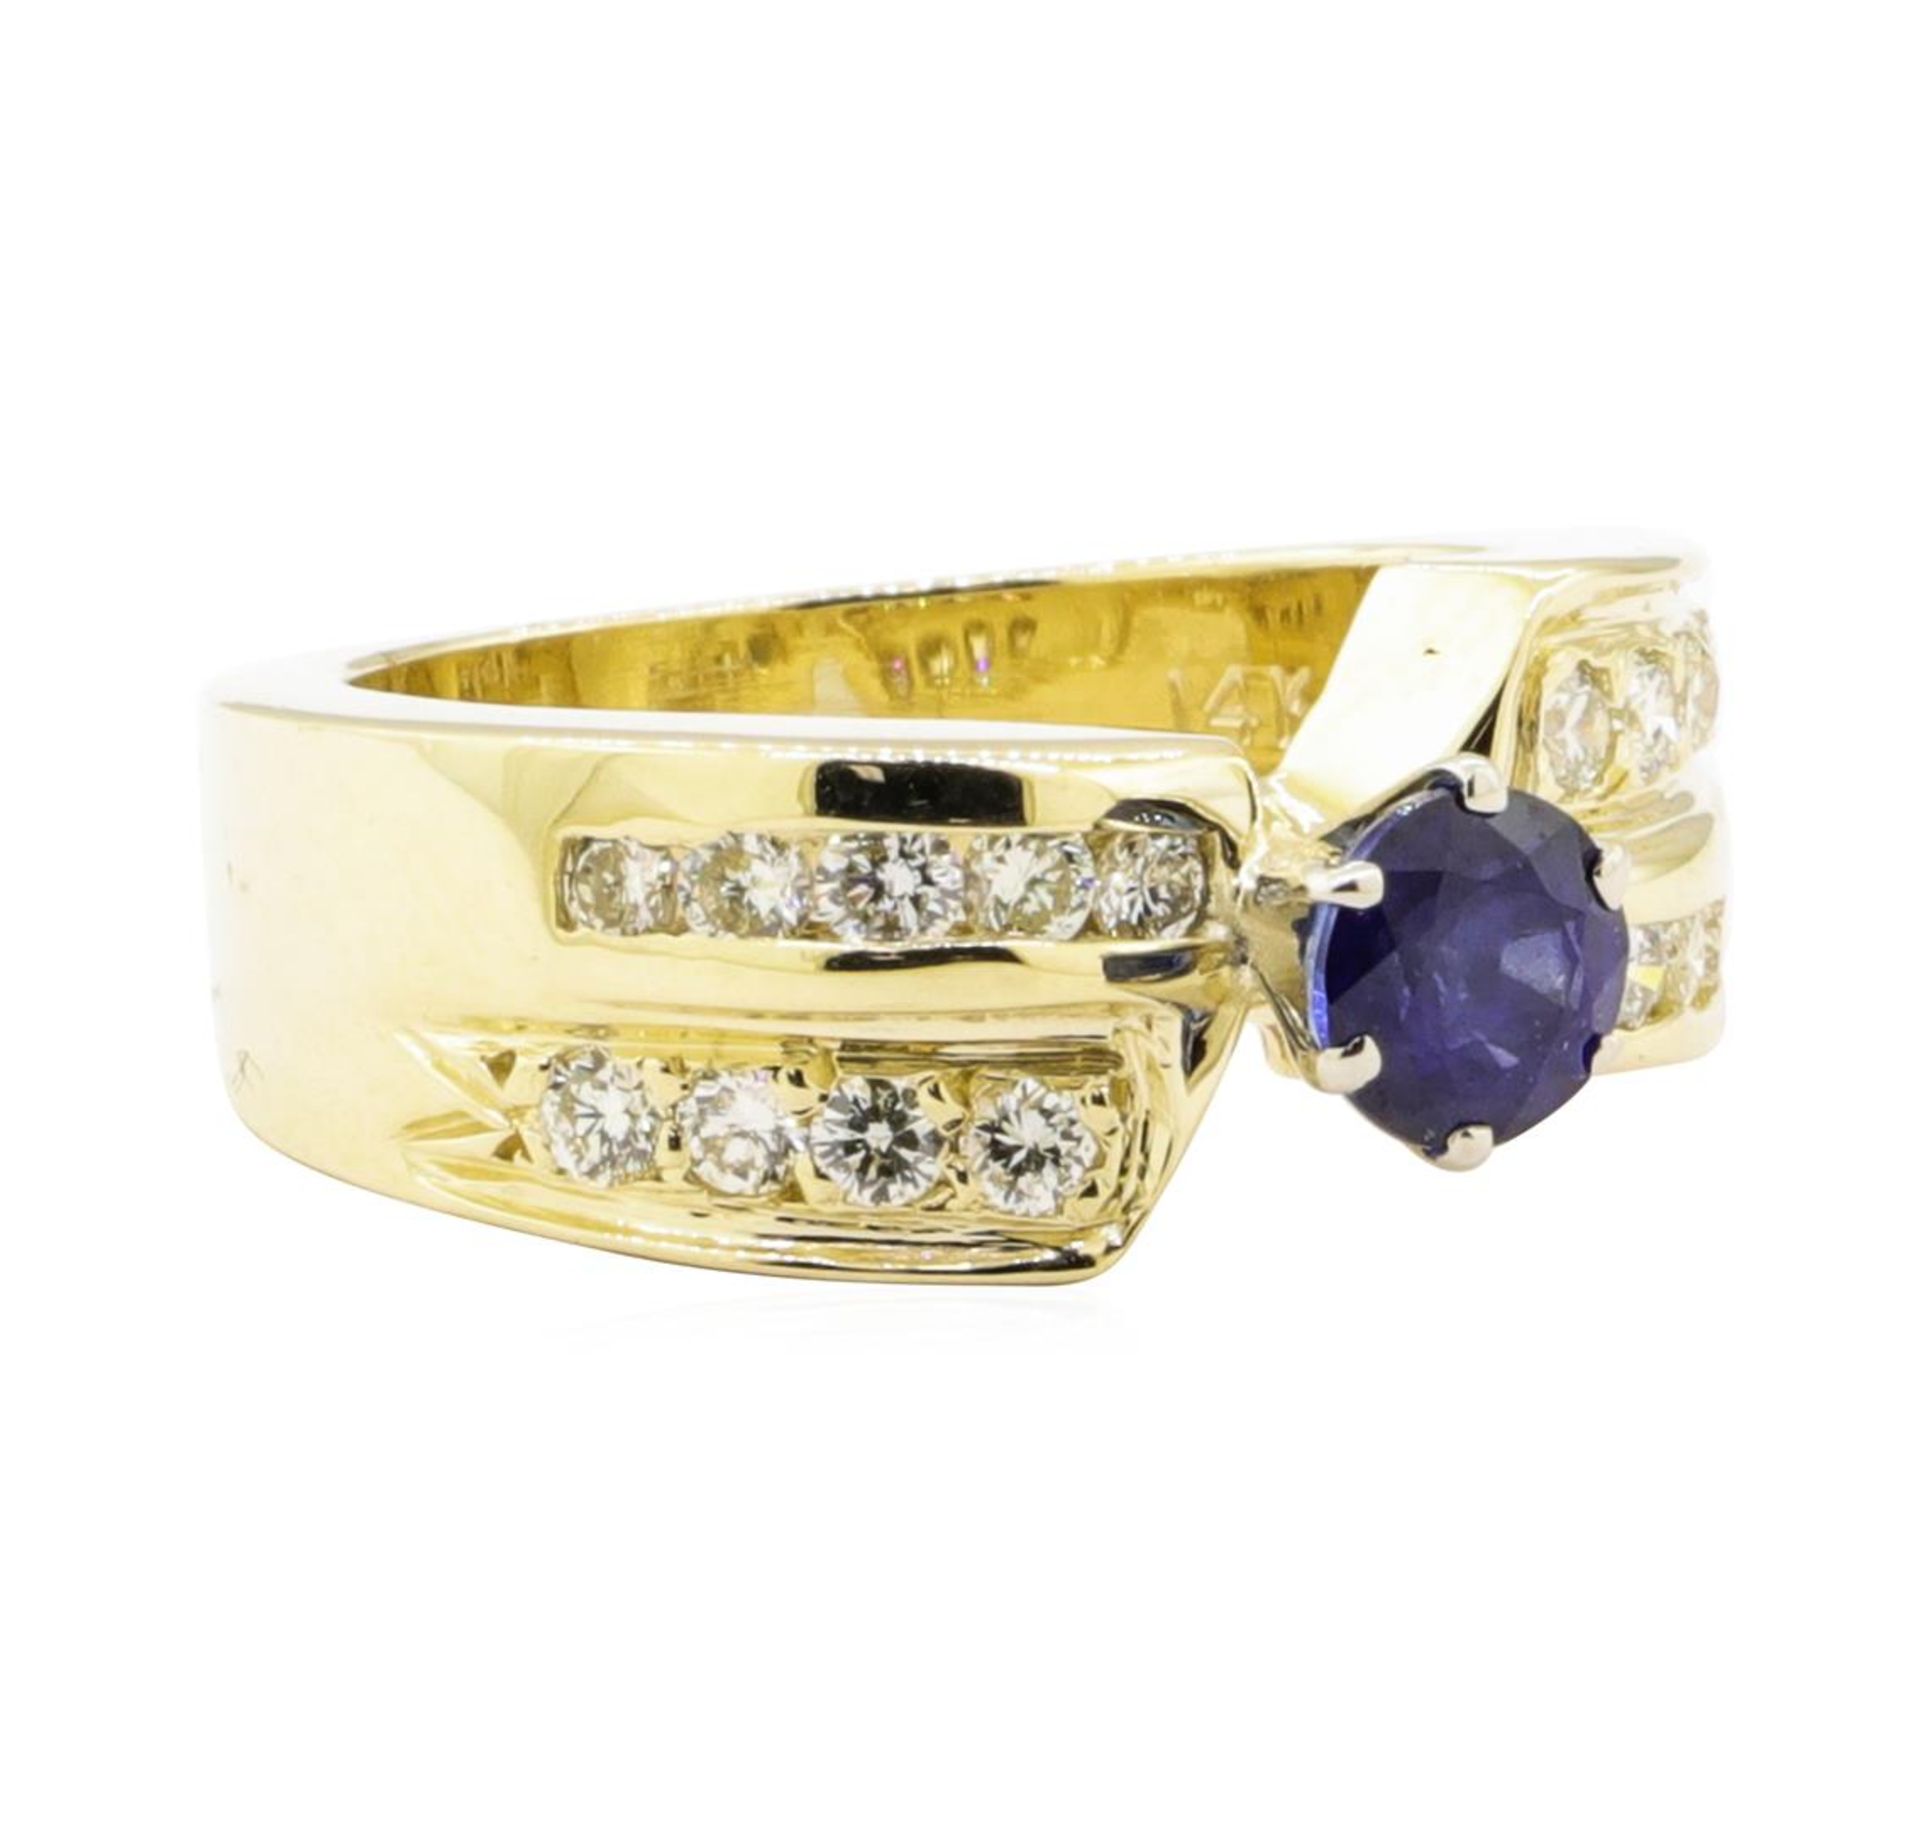 1.16 ctw Blue Sapphire And Diamond Ring - 14KT Yellow Gold